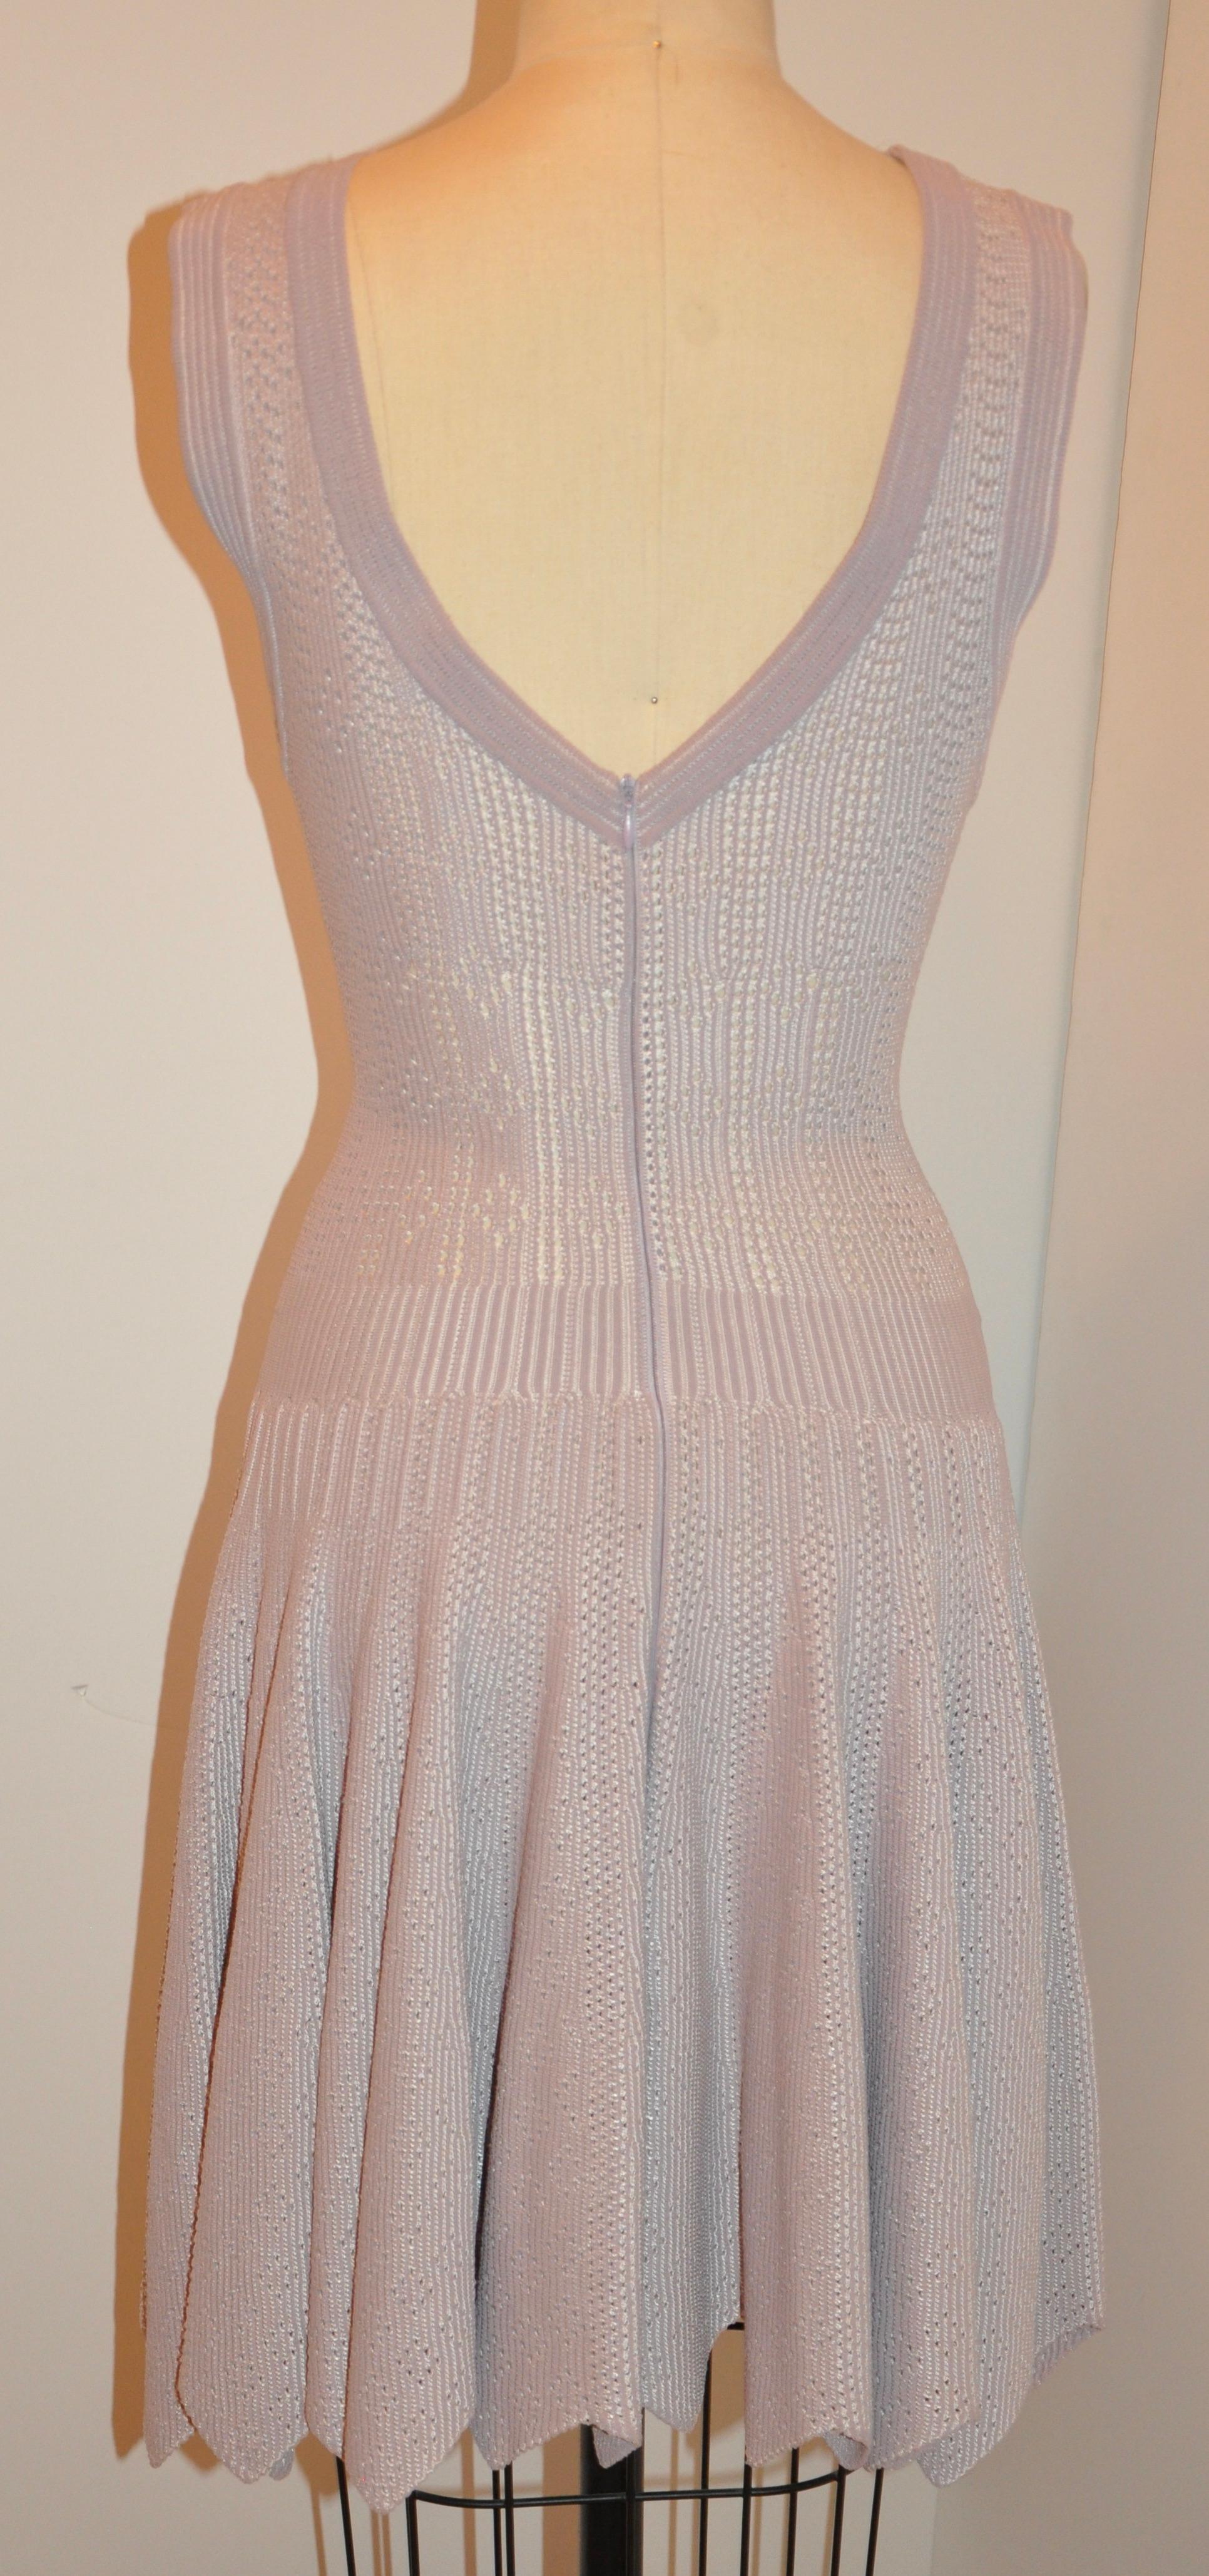 Rare Azzedine Alaia Signature Fawn-Hue Form-Fitting Eyelet Accented Swing Dress For Sale 4